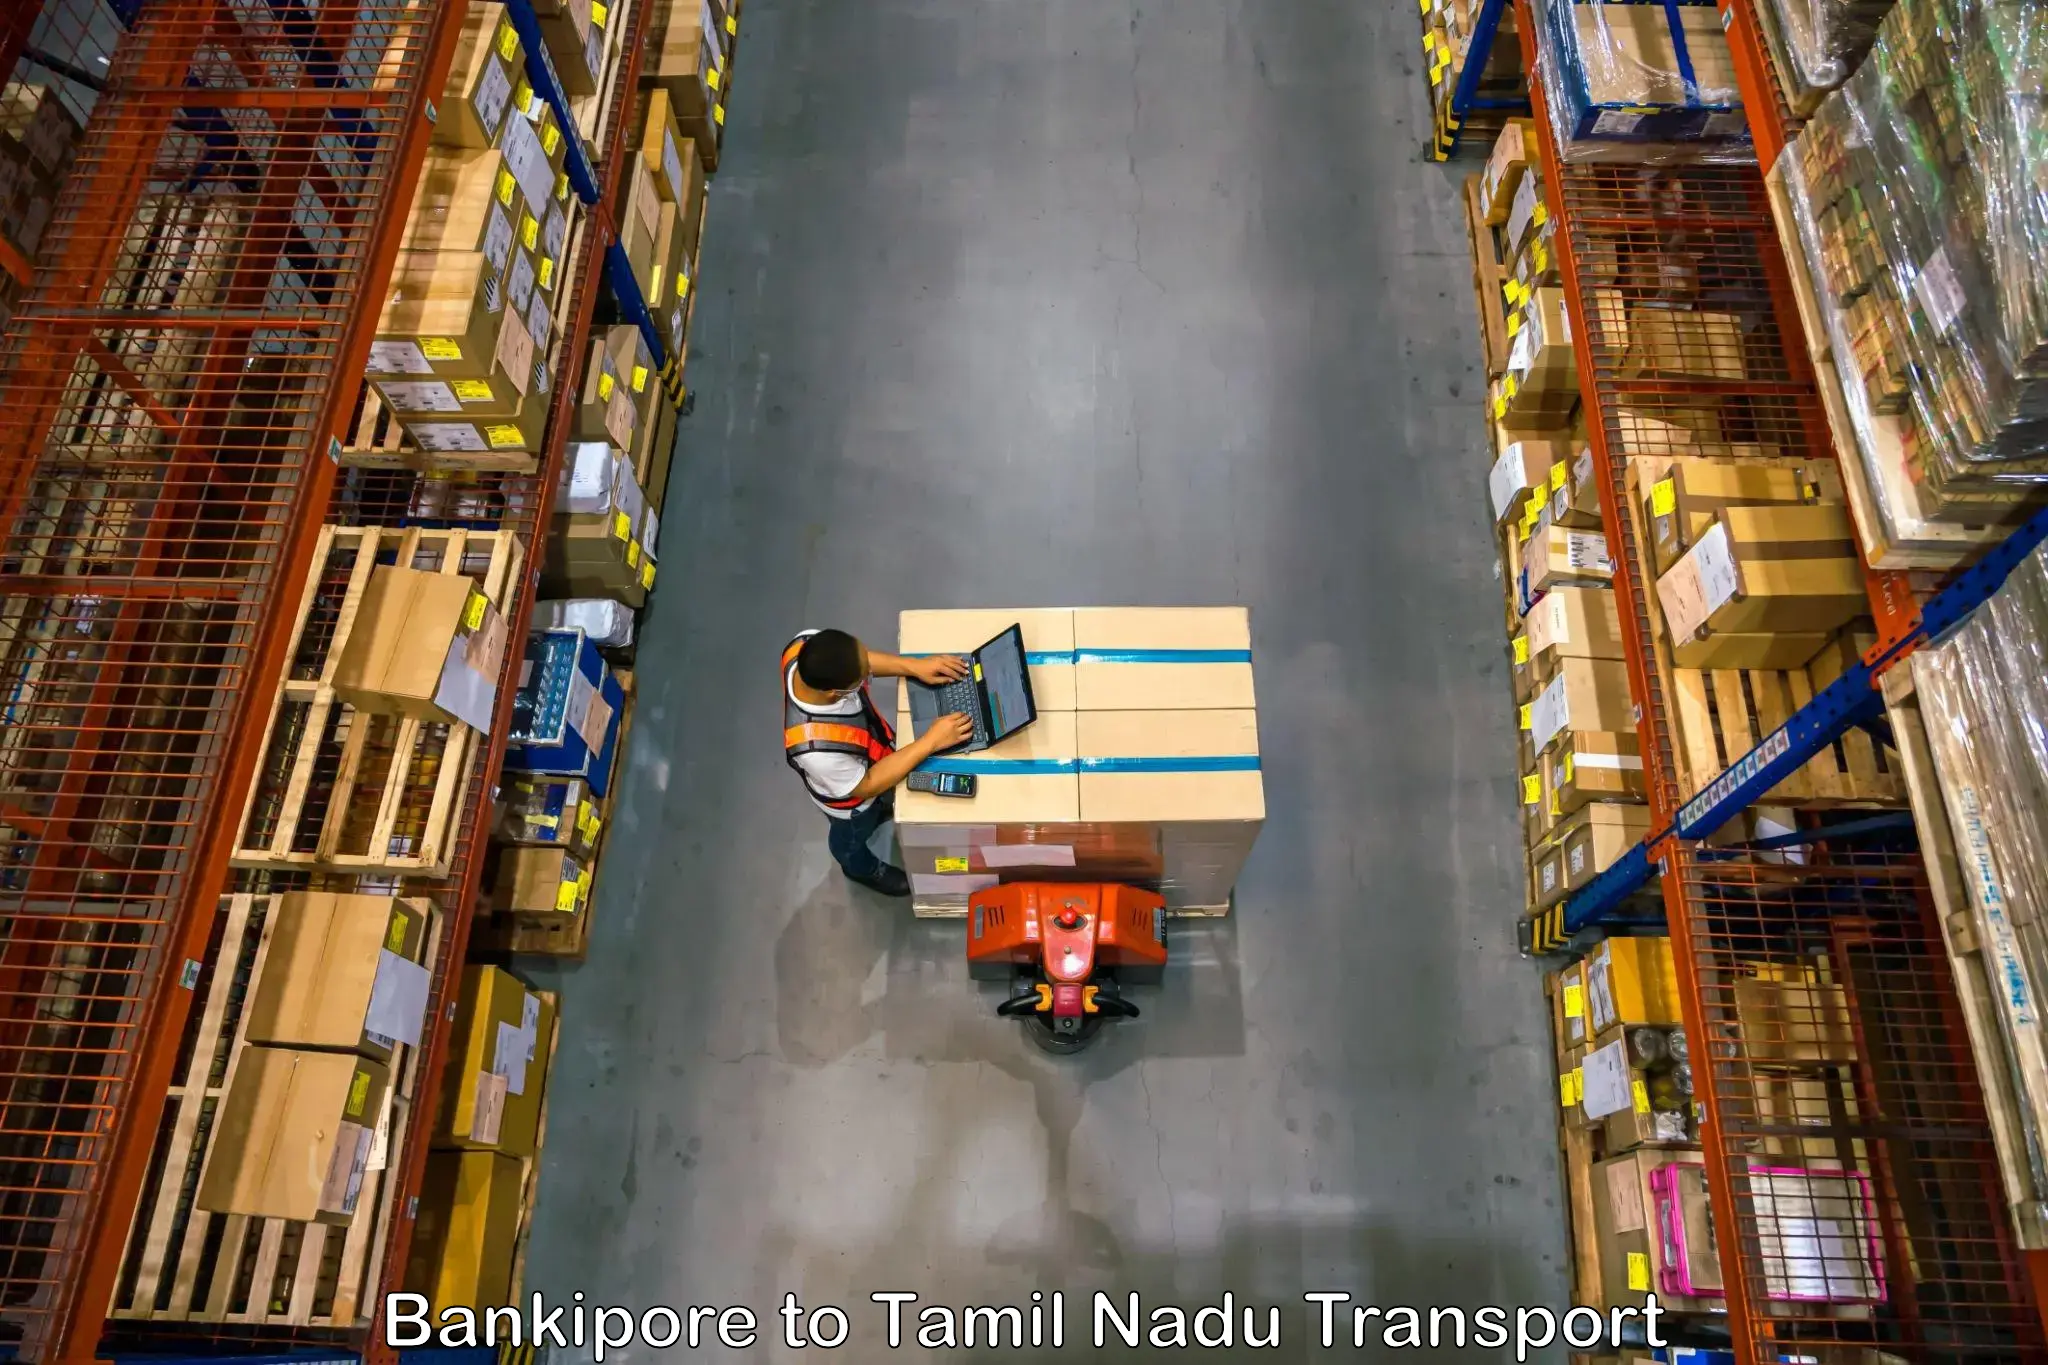 Goods delivery service Bankipore to Chennai